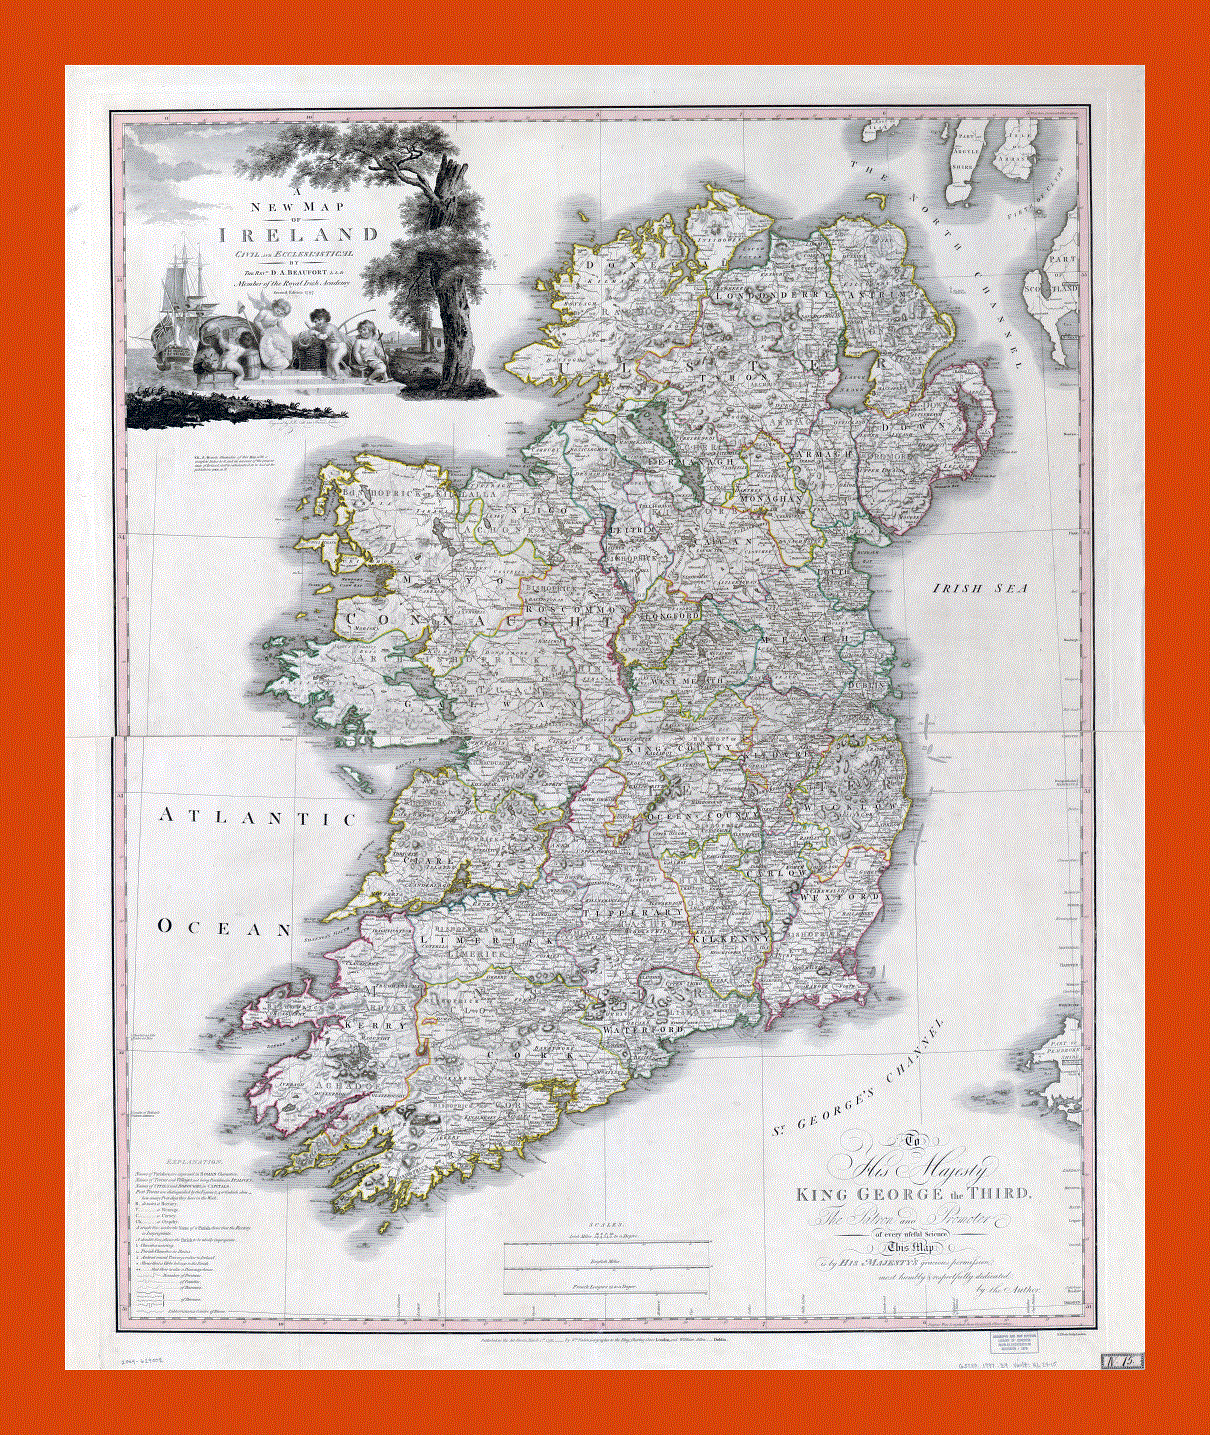 Old political and administrative map of Ireland - 1797